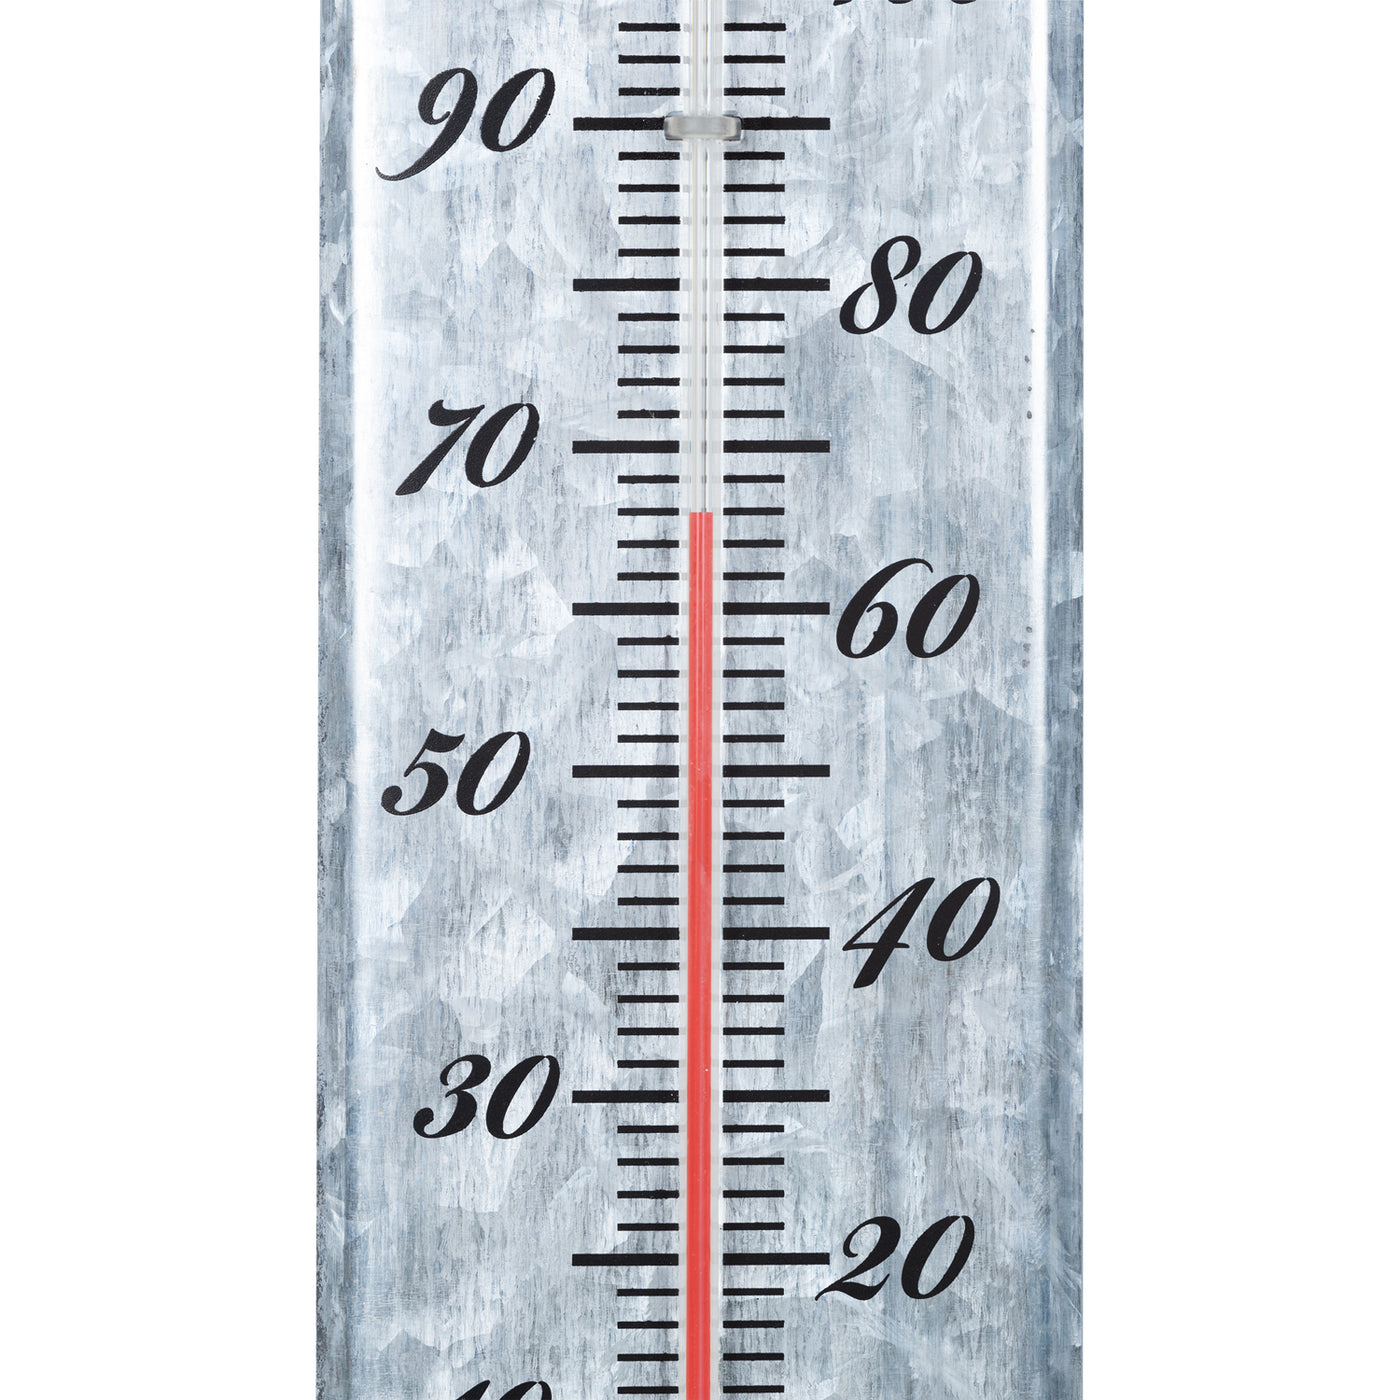 1,550 Analog Thermometer Images, Stock Photos, 3D objects, & Vectors